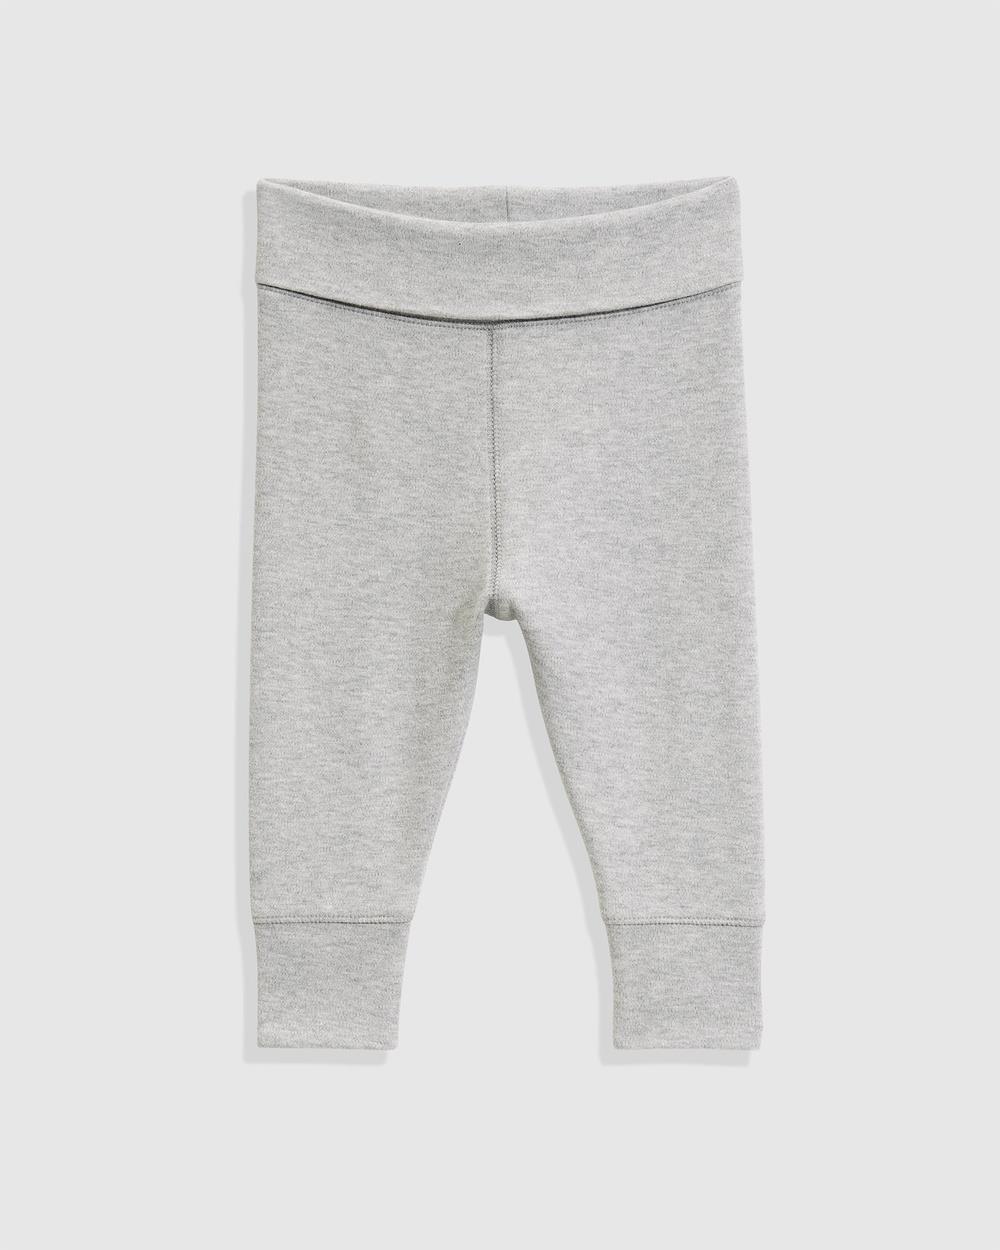 Country Road - Organically Grown Cotton Fold over Soft Pant - Pants (Grey) Organically Grown Cotton Fold-over Soft Pant